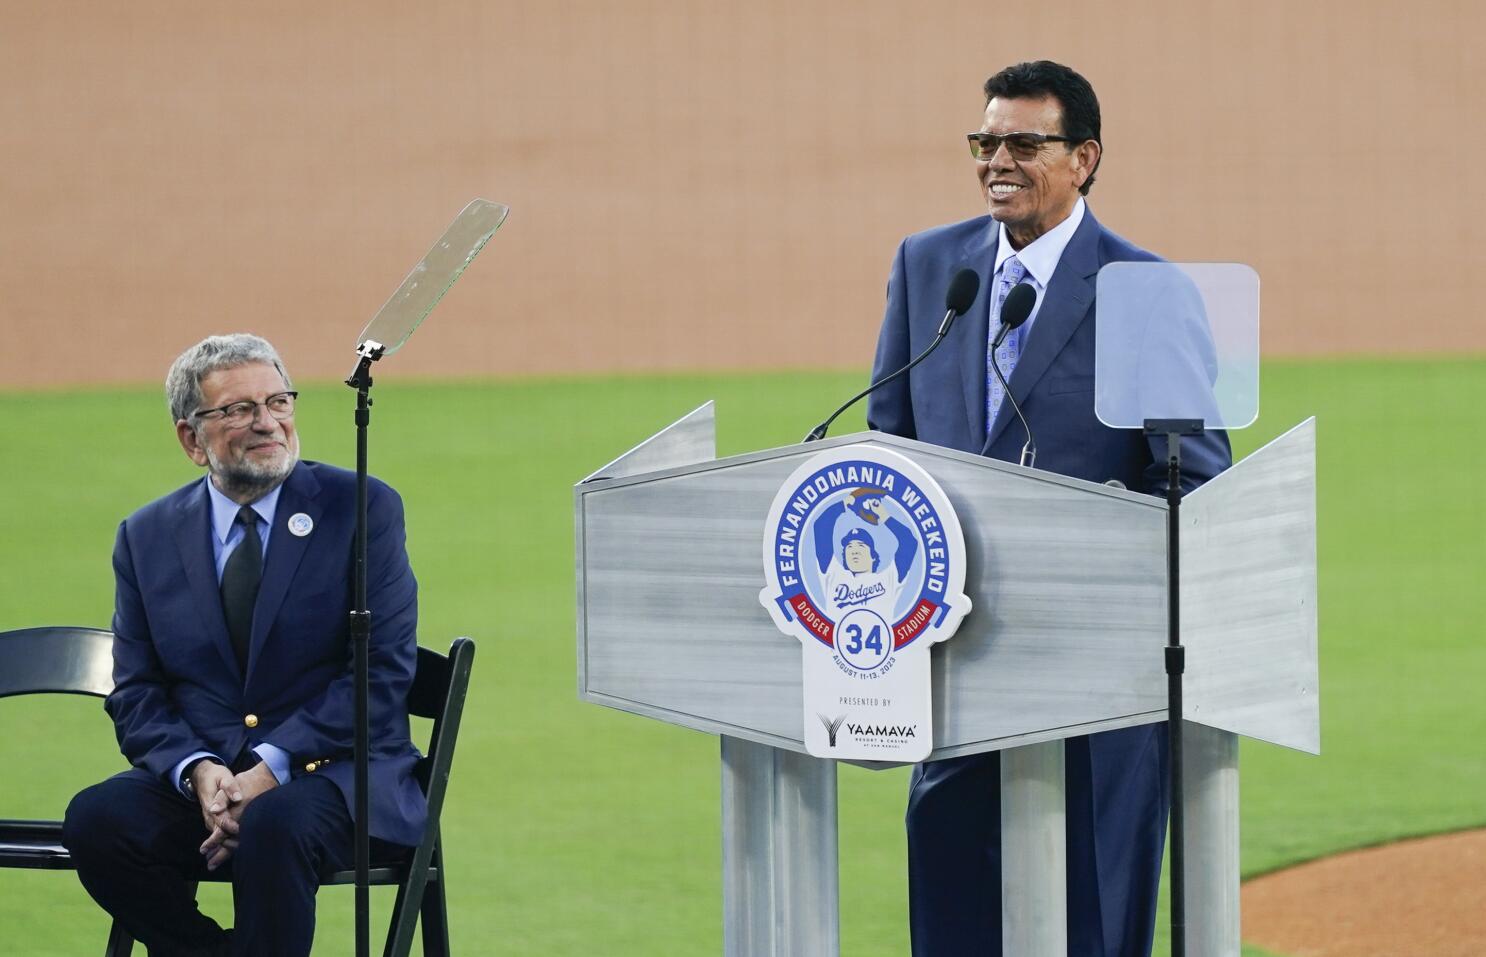 Fernando Valenzuela Finally Gets a Much Overdue Honor from the